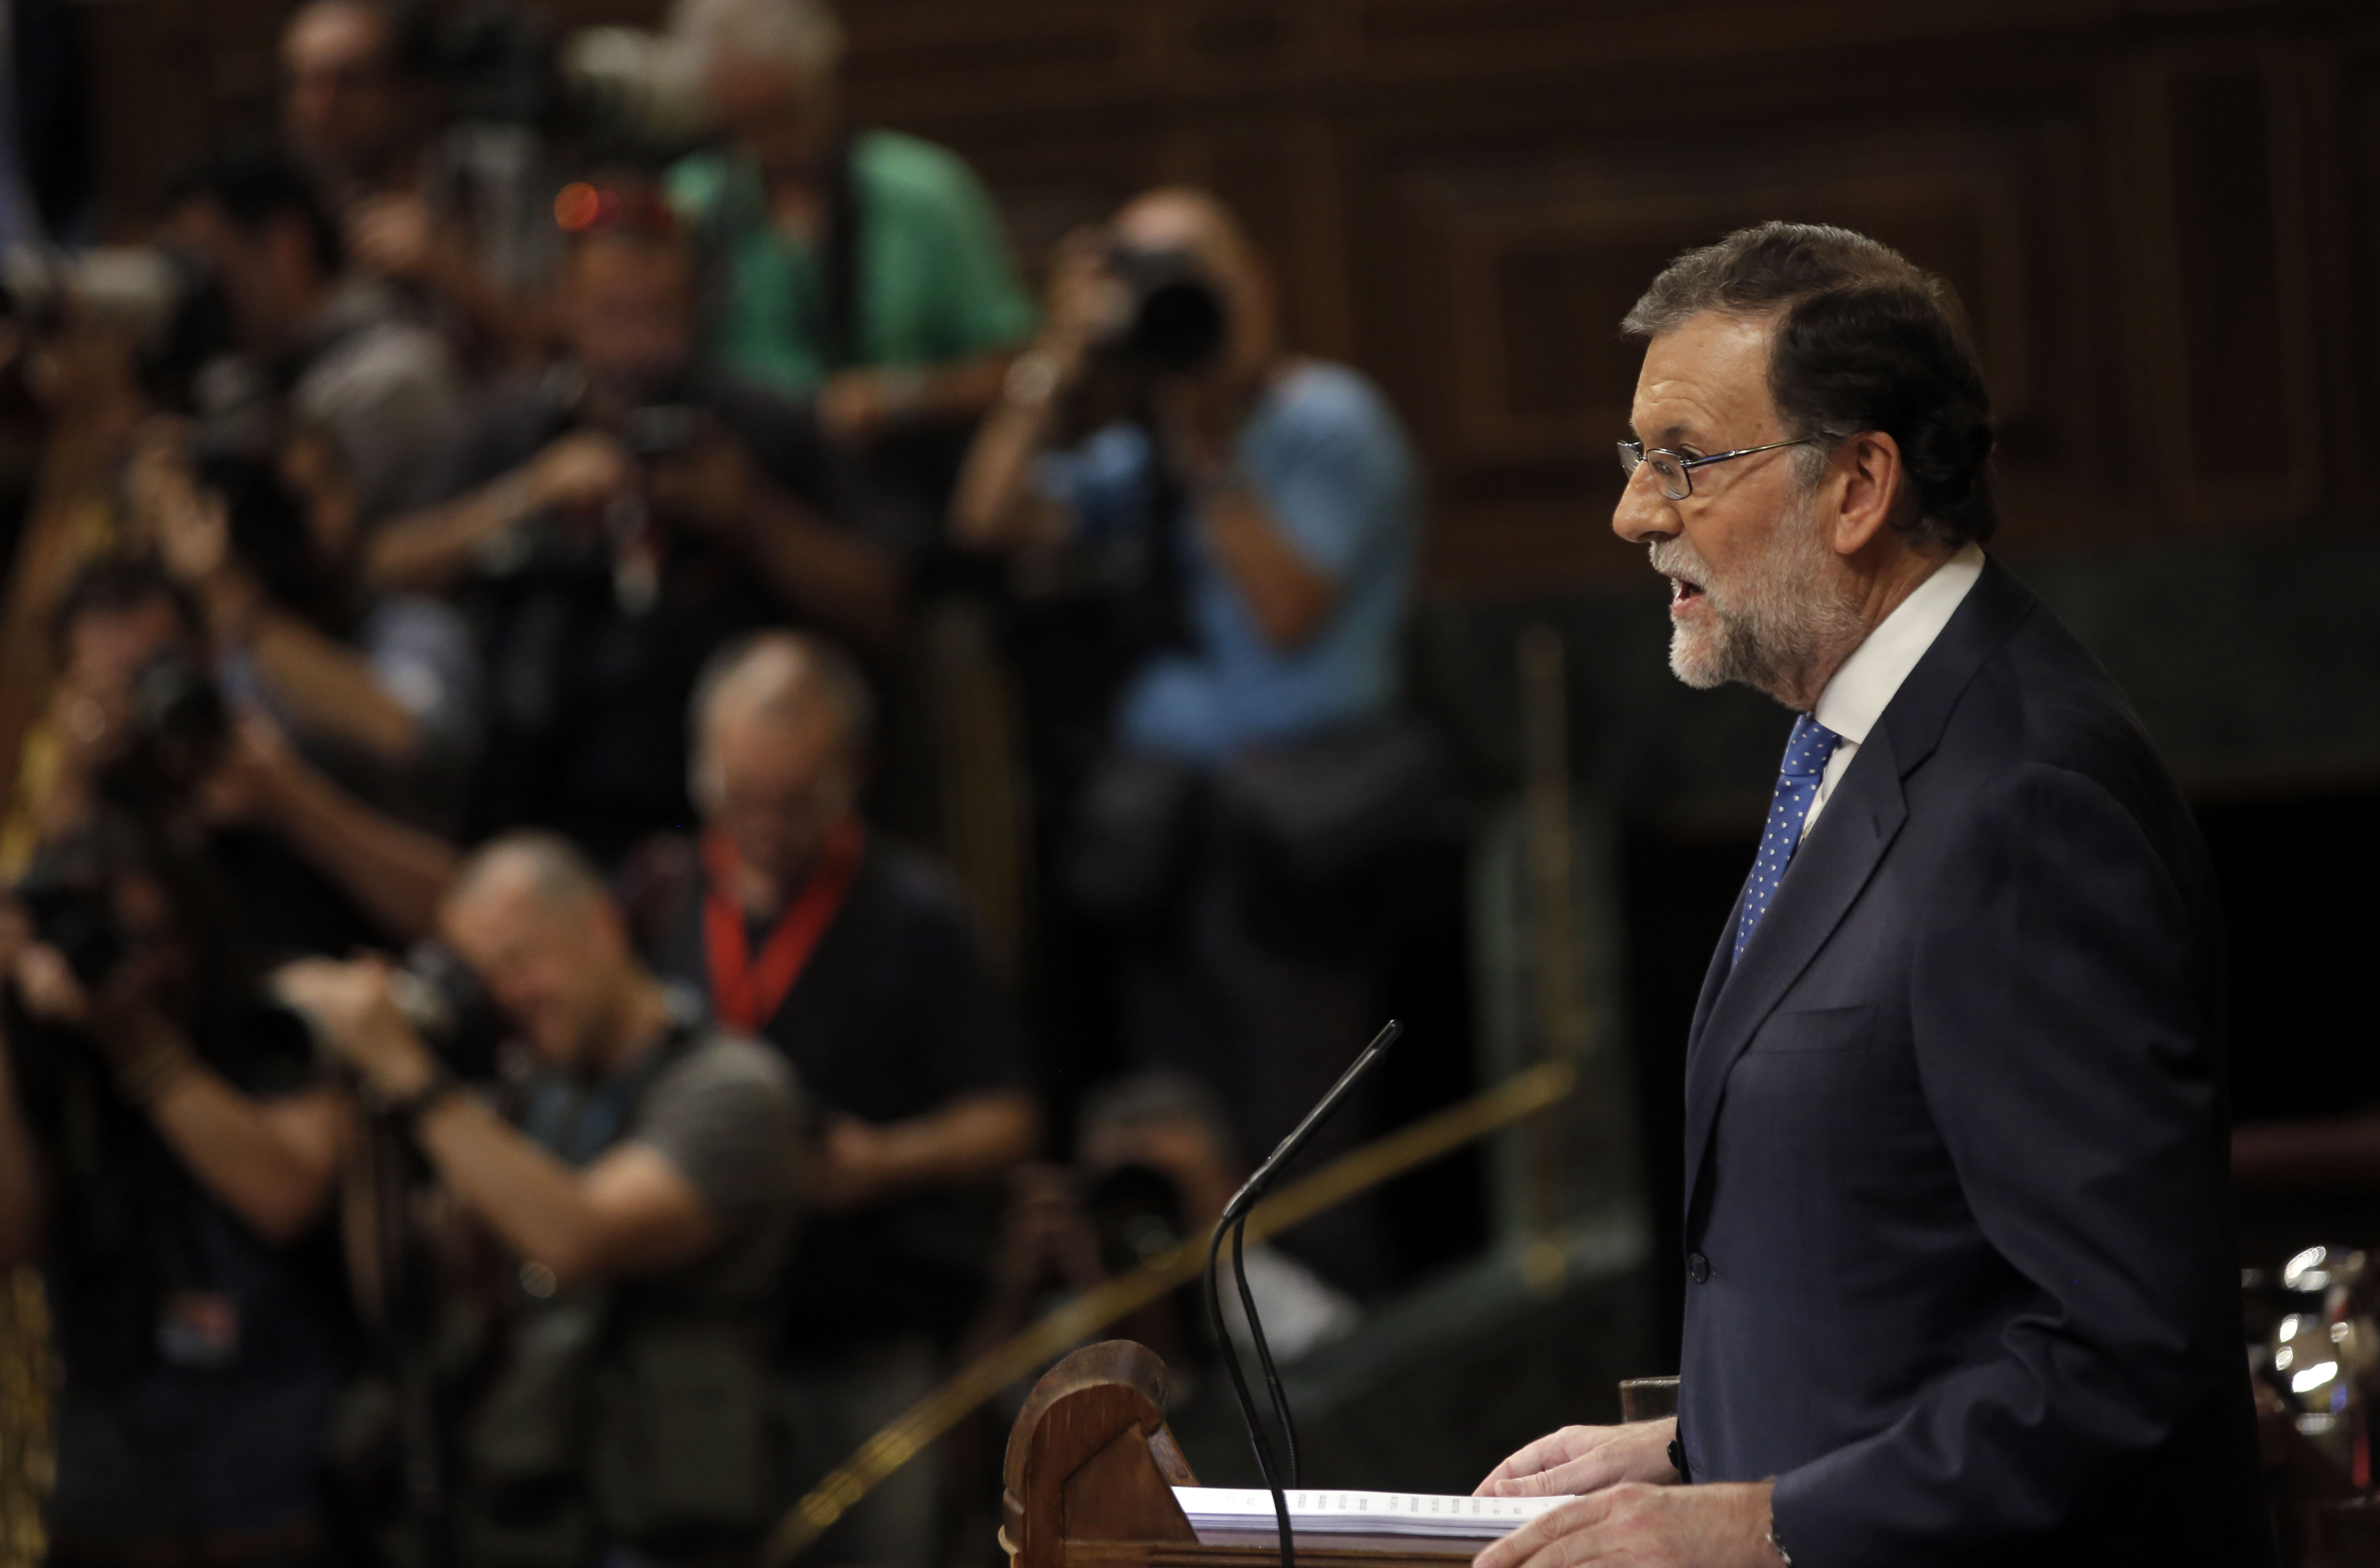 The leader of the PP, Mariano Rajoy, in the Spanish Parliament (by ACN)